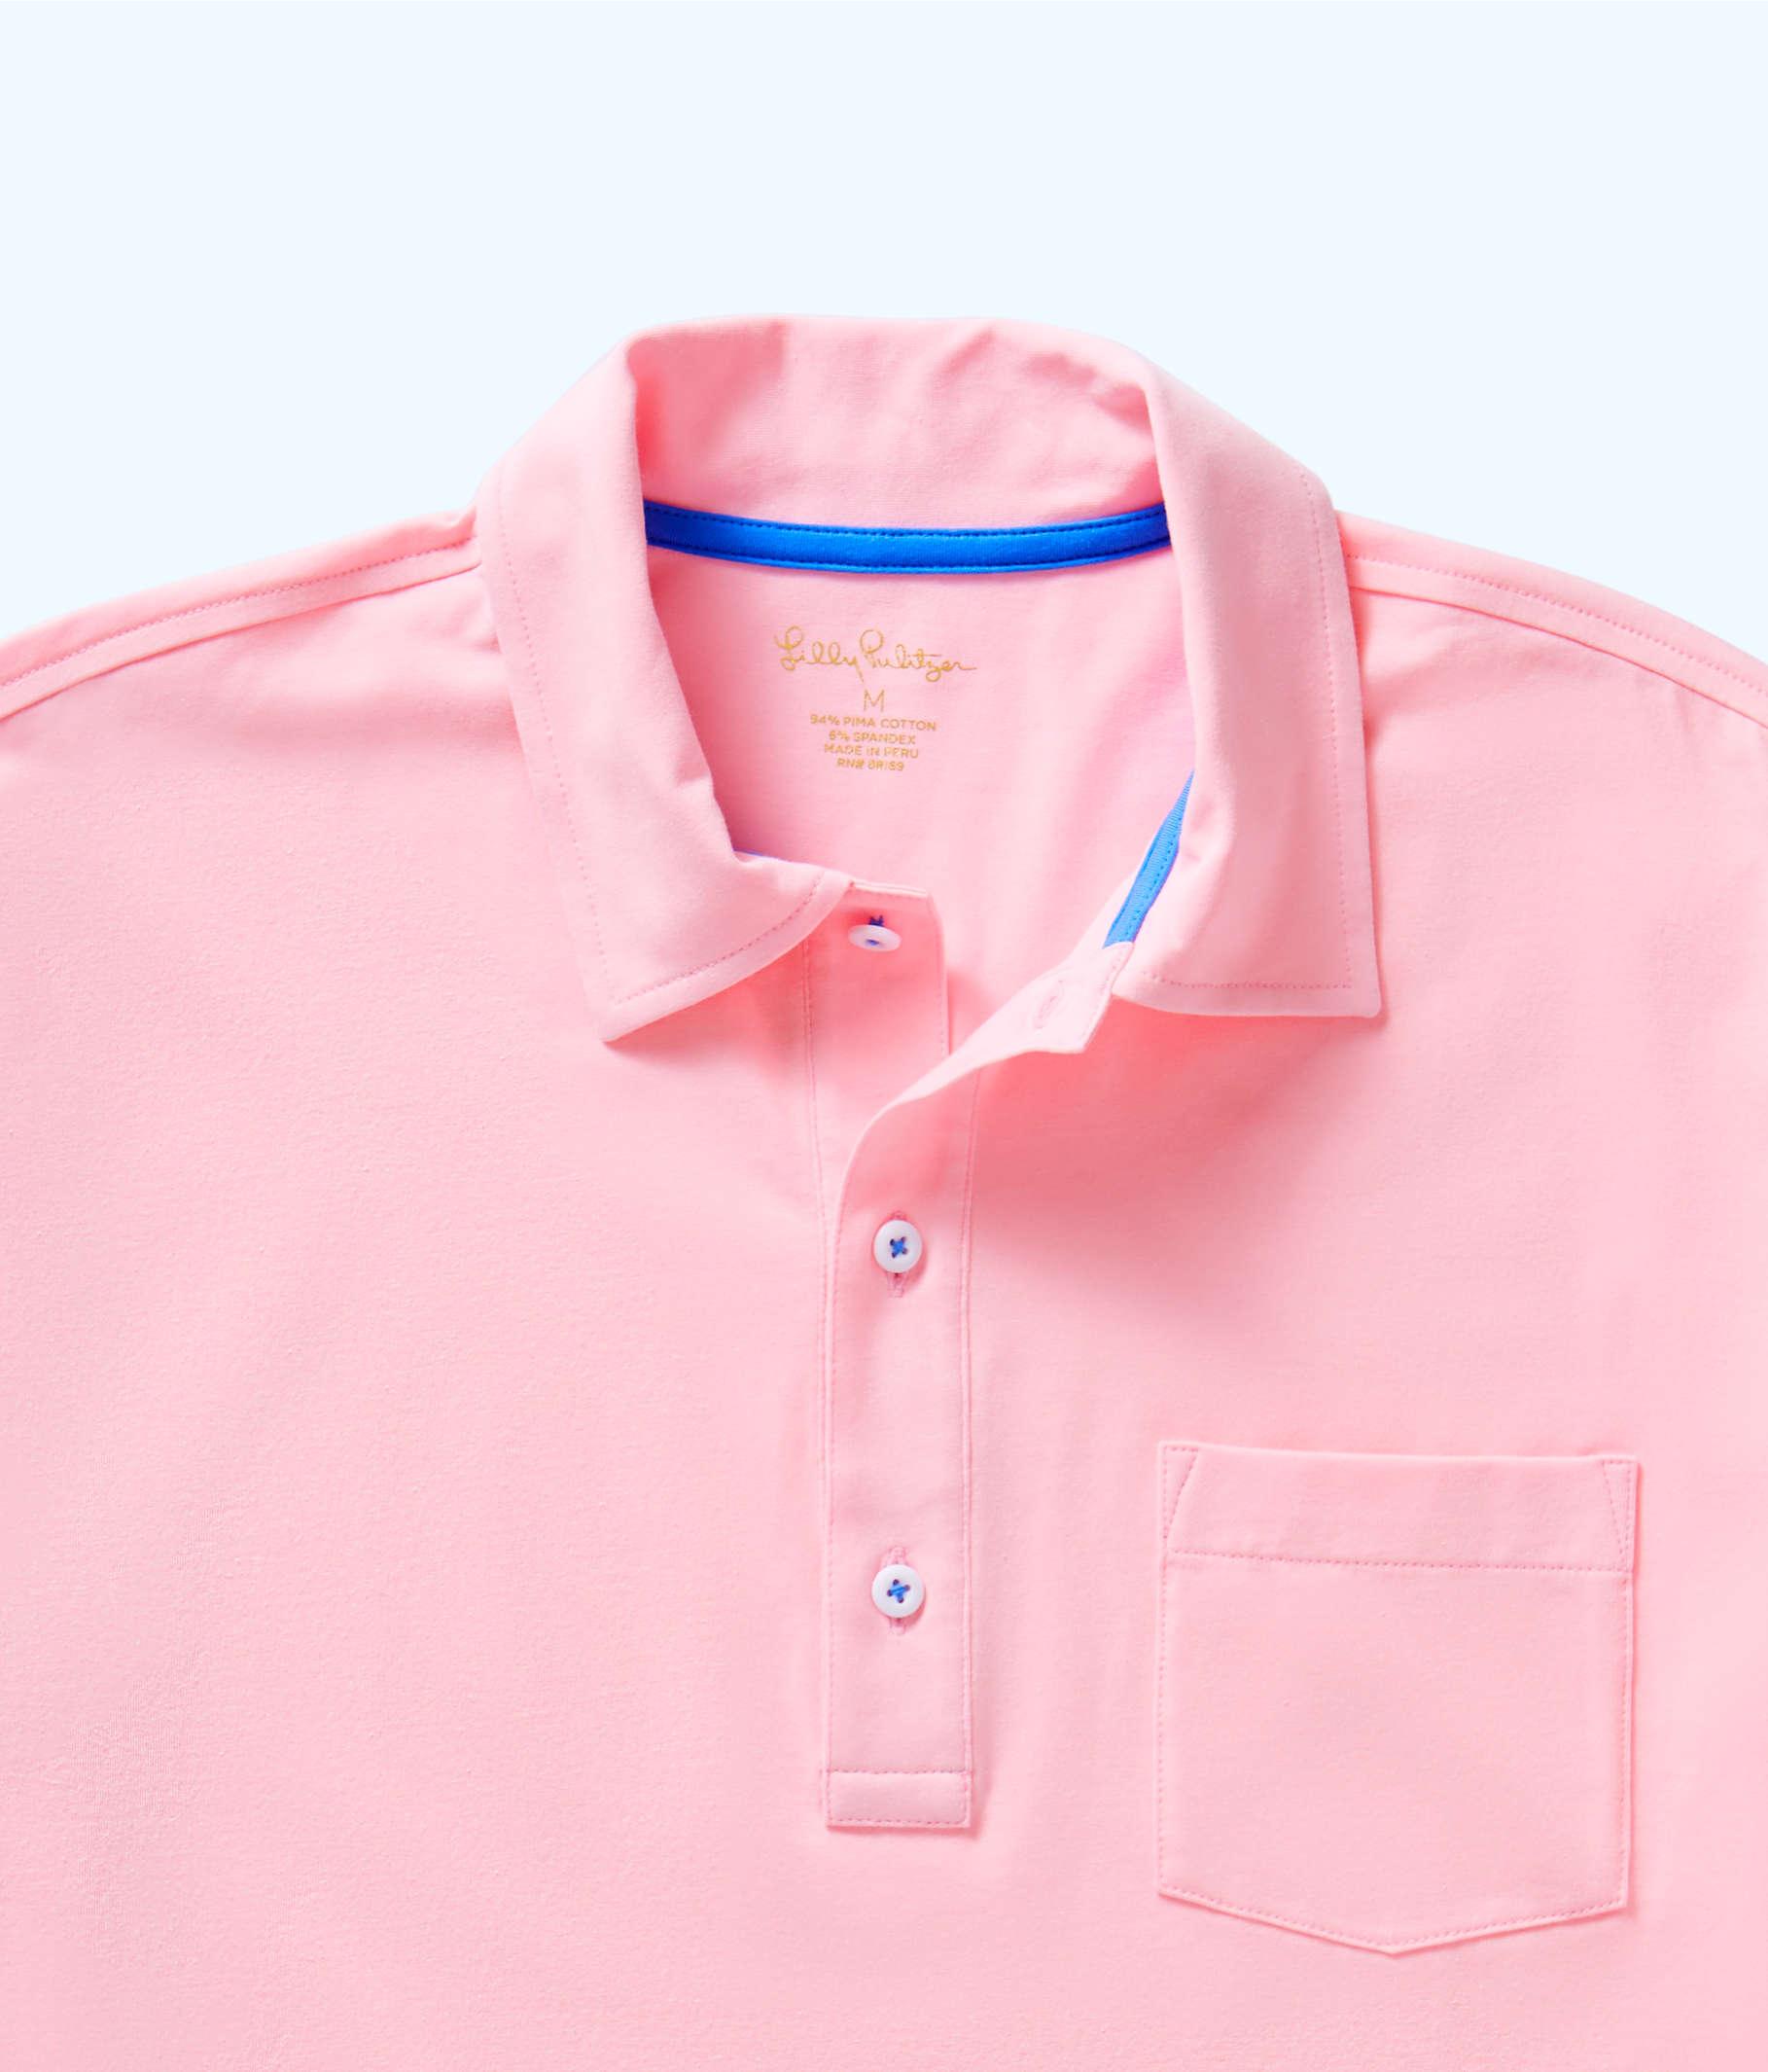 Lilly Pulitzer Rubber Men's Polo Shirt in Pink - Lyst